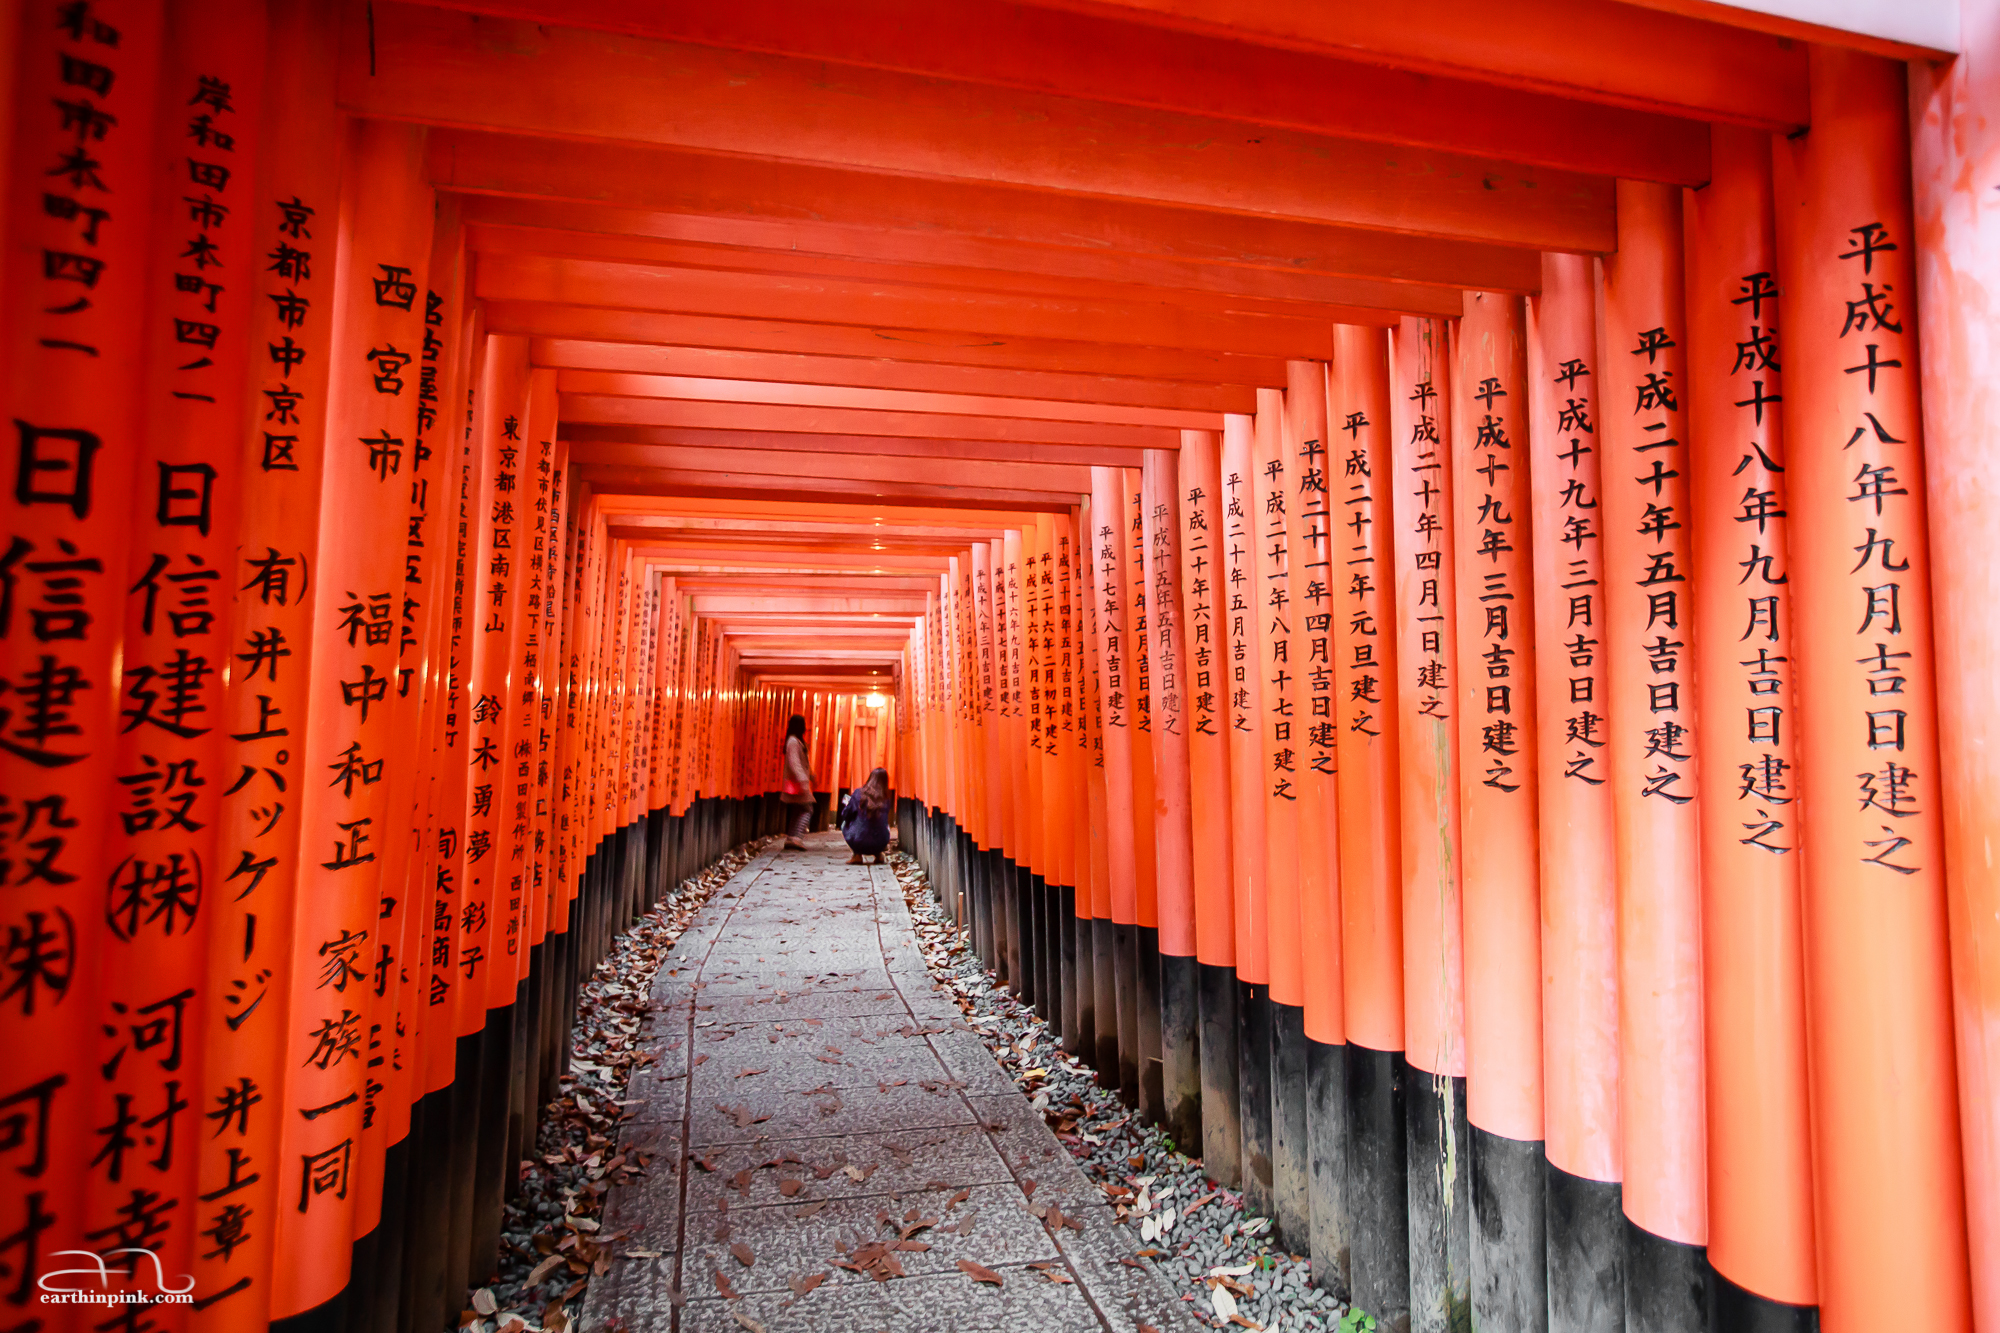 The Fushimi Inari Taisha, where paths up the mountain lead through thousands of torii gates. In autumn, the orange of the gates is complemented by the colour of the leaves fallen on the ground.